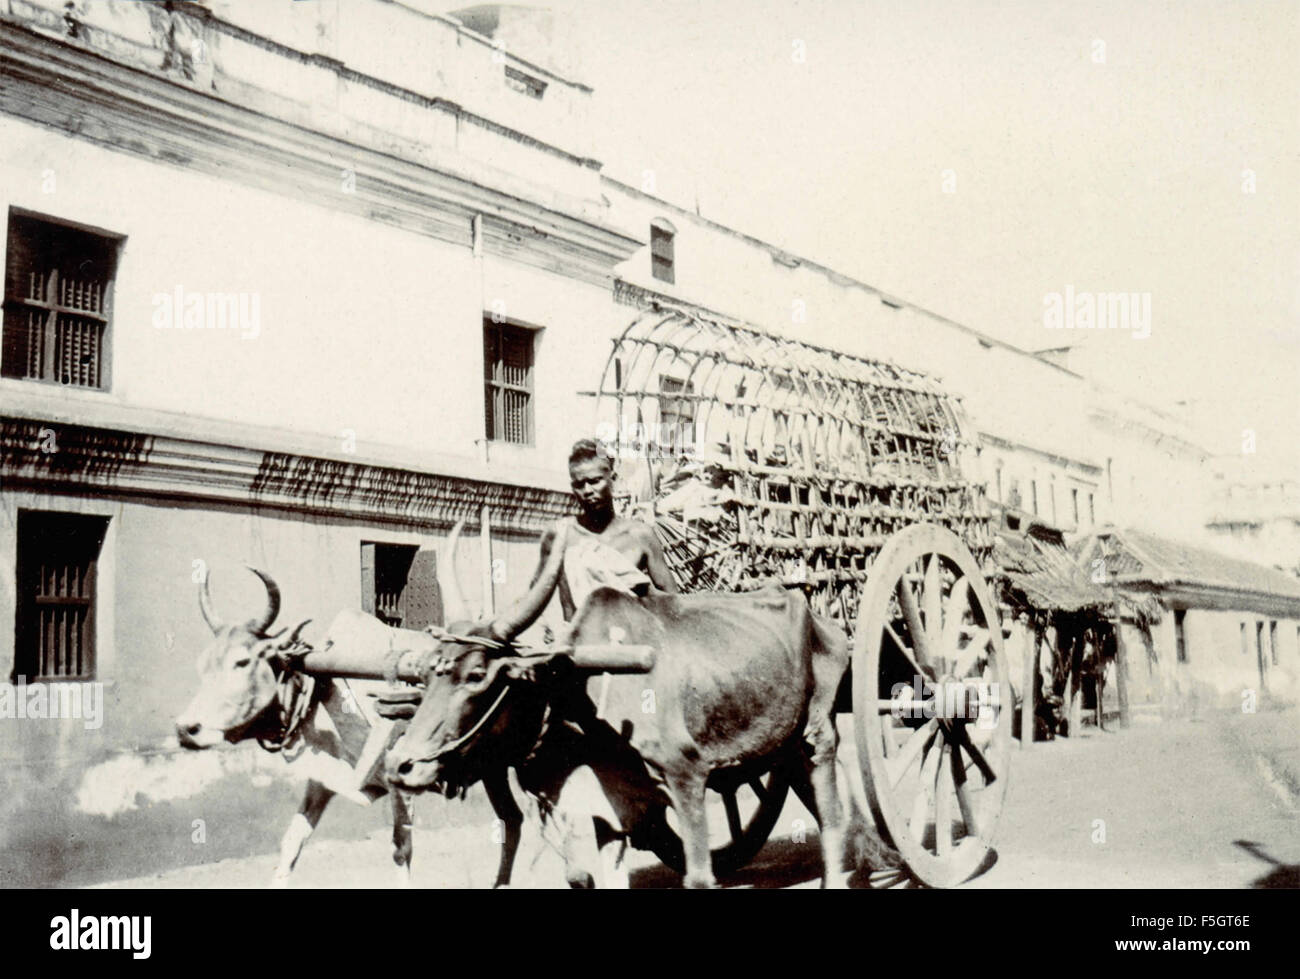 Chariot drawn by cattle, India Stock Photo